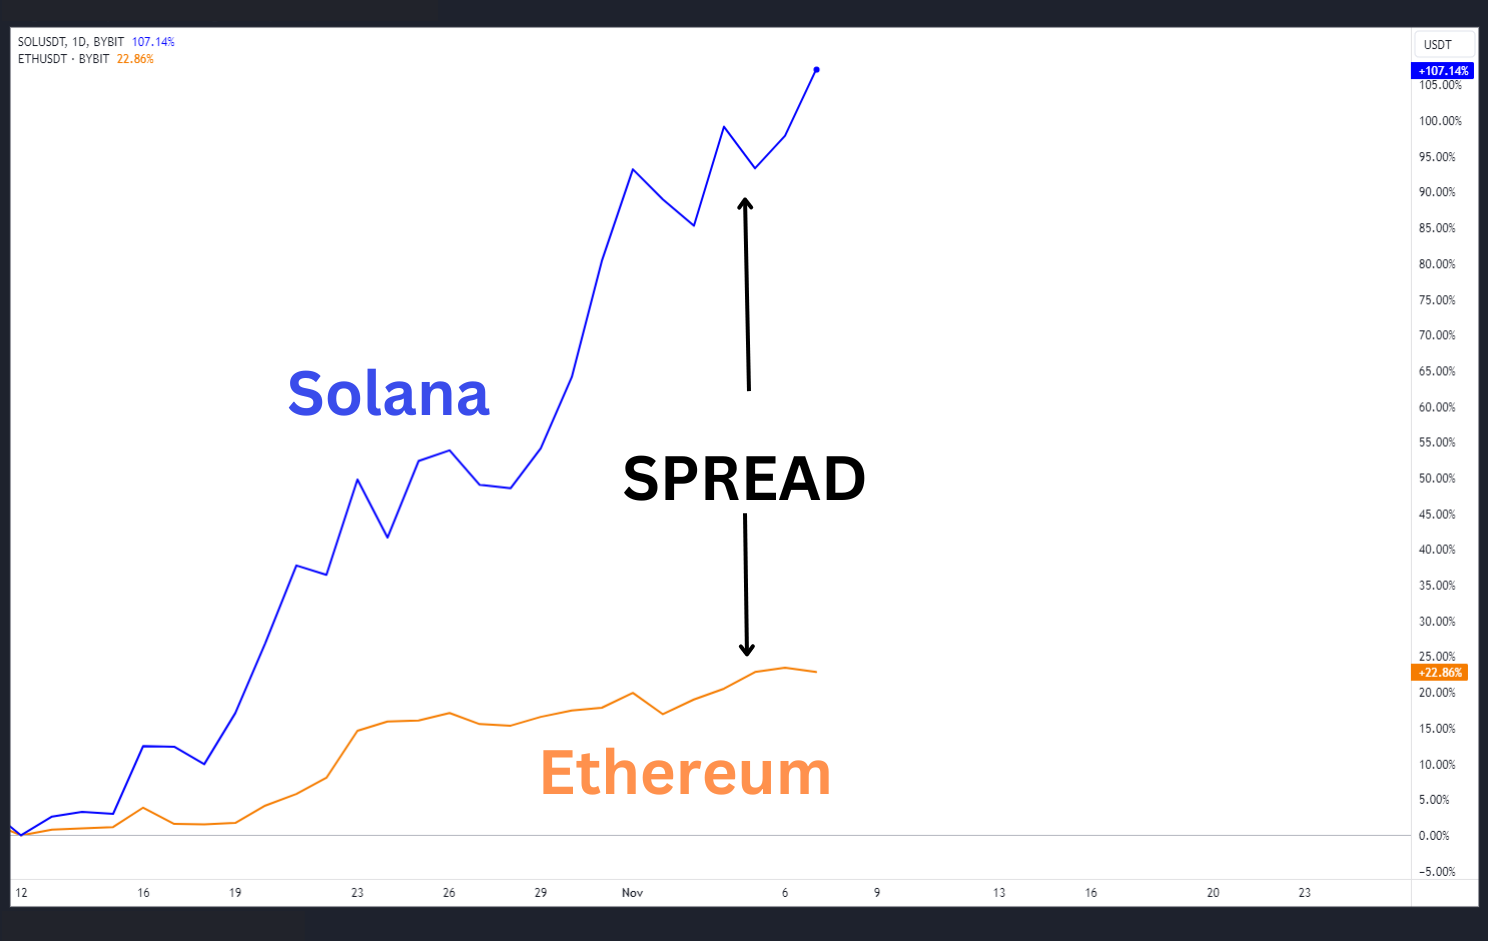 Bybit SOLUSDT/ETHUSDT price chart showing a large SOL-ETH spread.